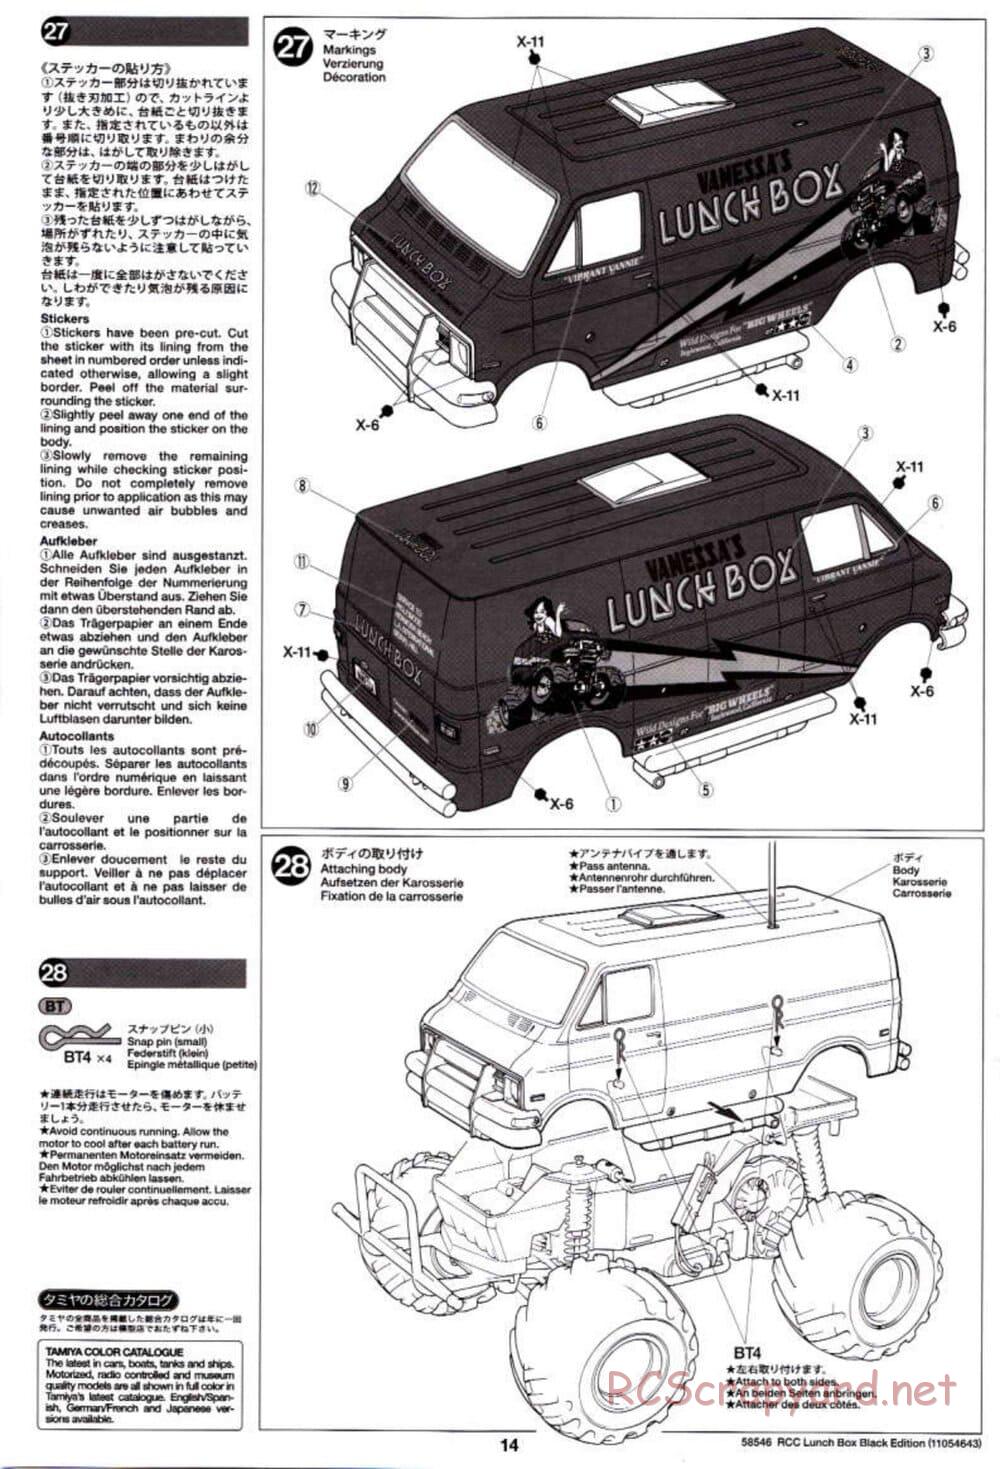 Tamiya - Lunch Box - Black Edition - CW-01 Chassis - Manual - Page 14